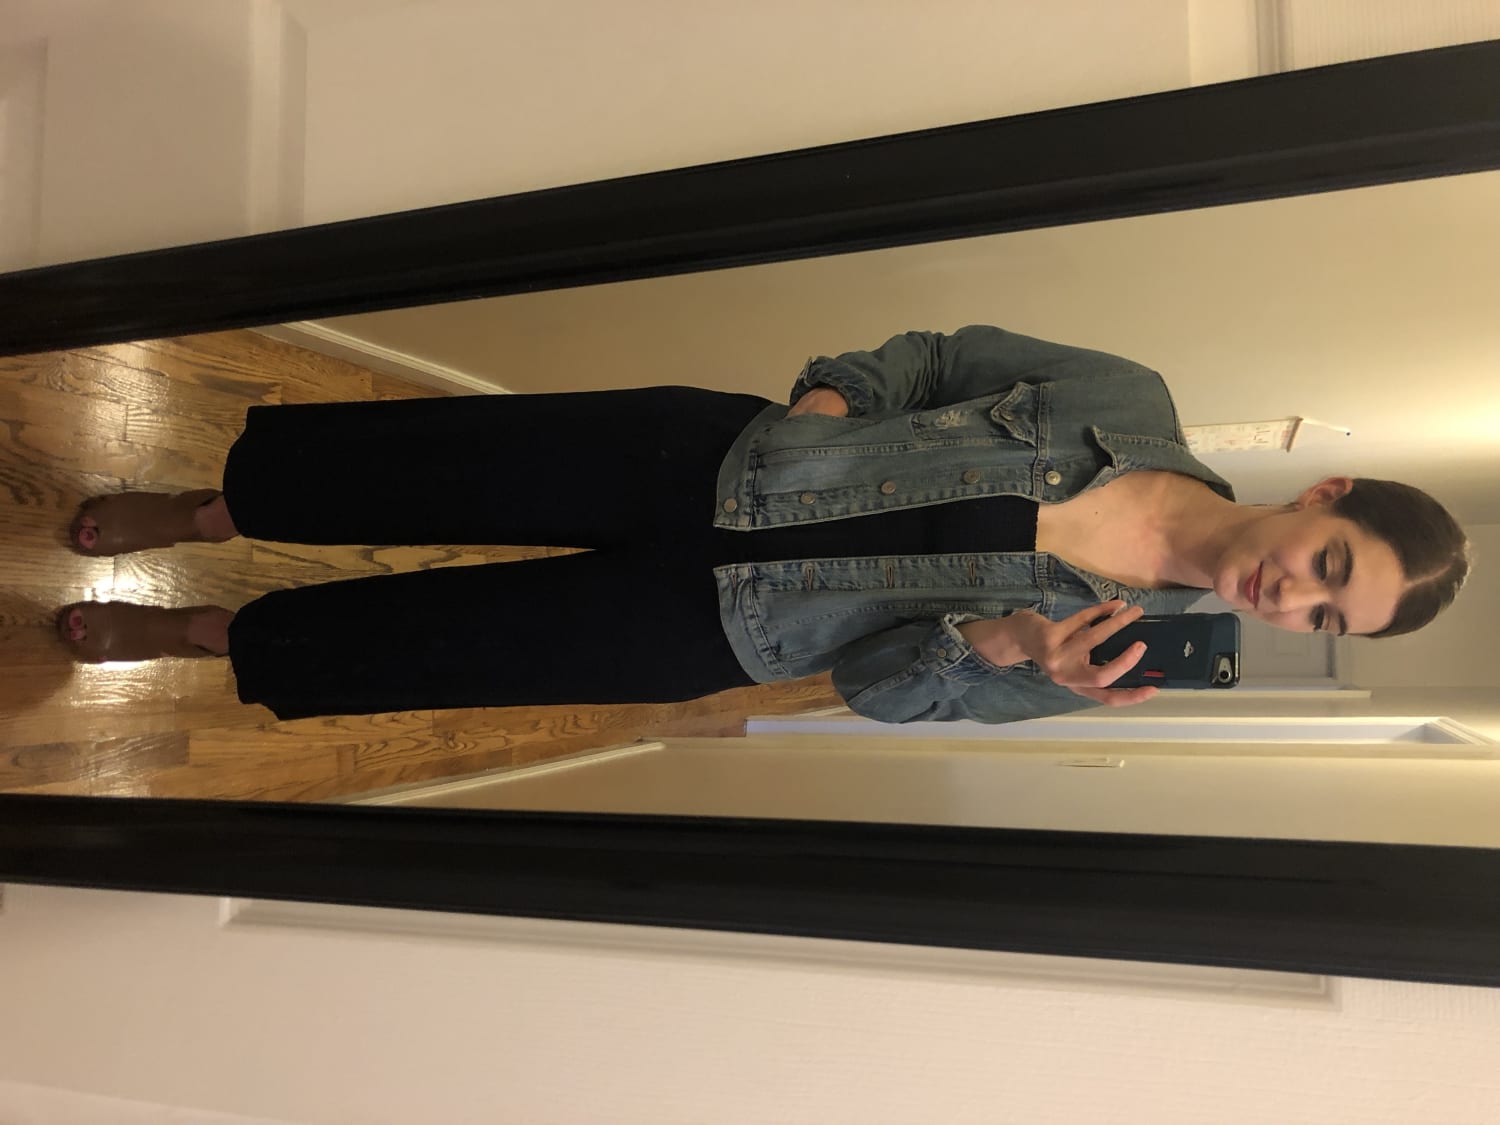 My friends picked out my clothes for a week. Here's what I learned